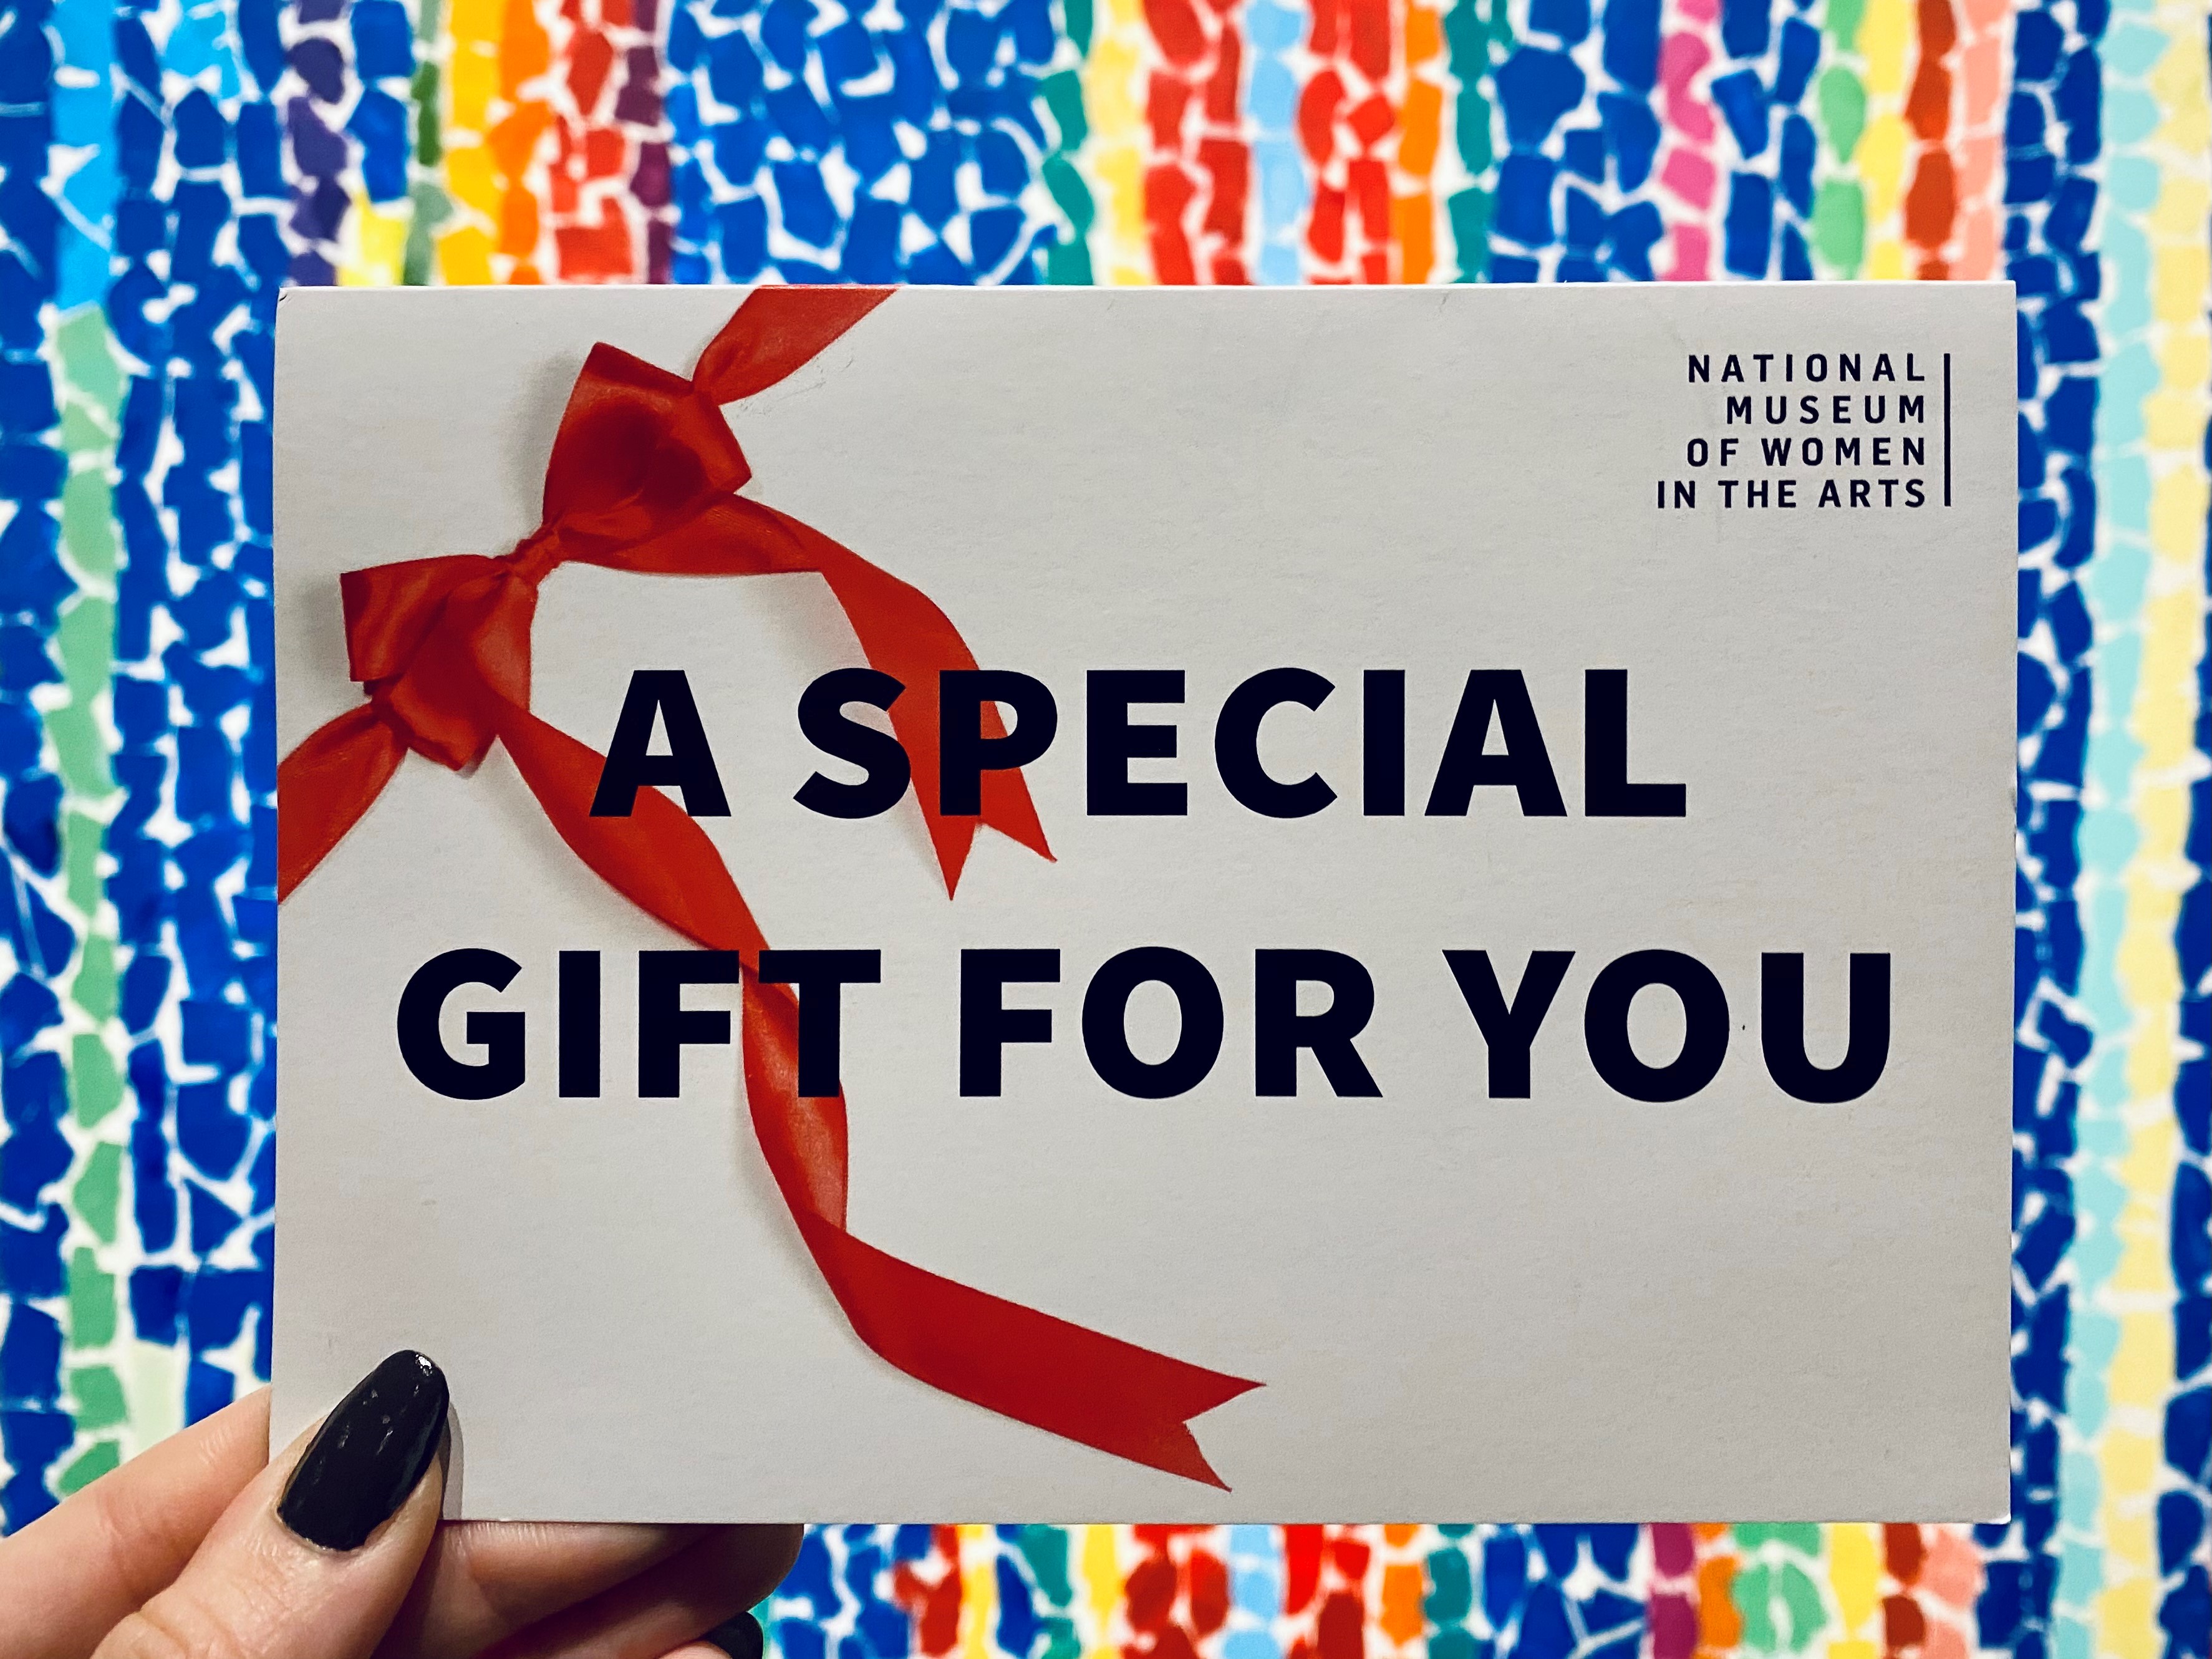 A light-skinned hand holds an envelope tied with a red ribbon that reads “A Special Gift for You” with the logo for the National Museum of Women in the Arts in the upper right corner. Behind the envelope is a colorful abstract painting.